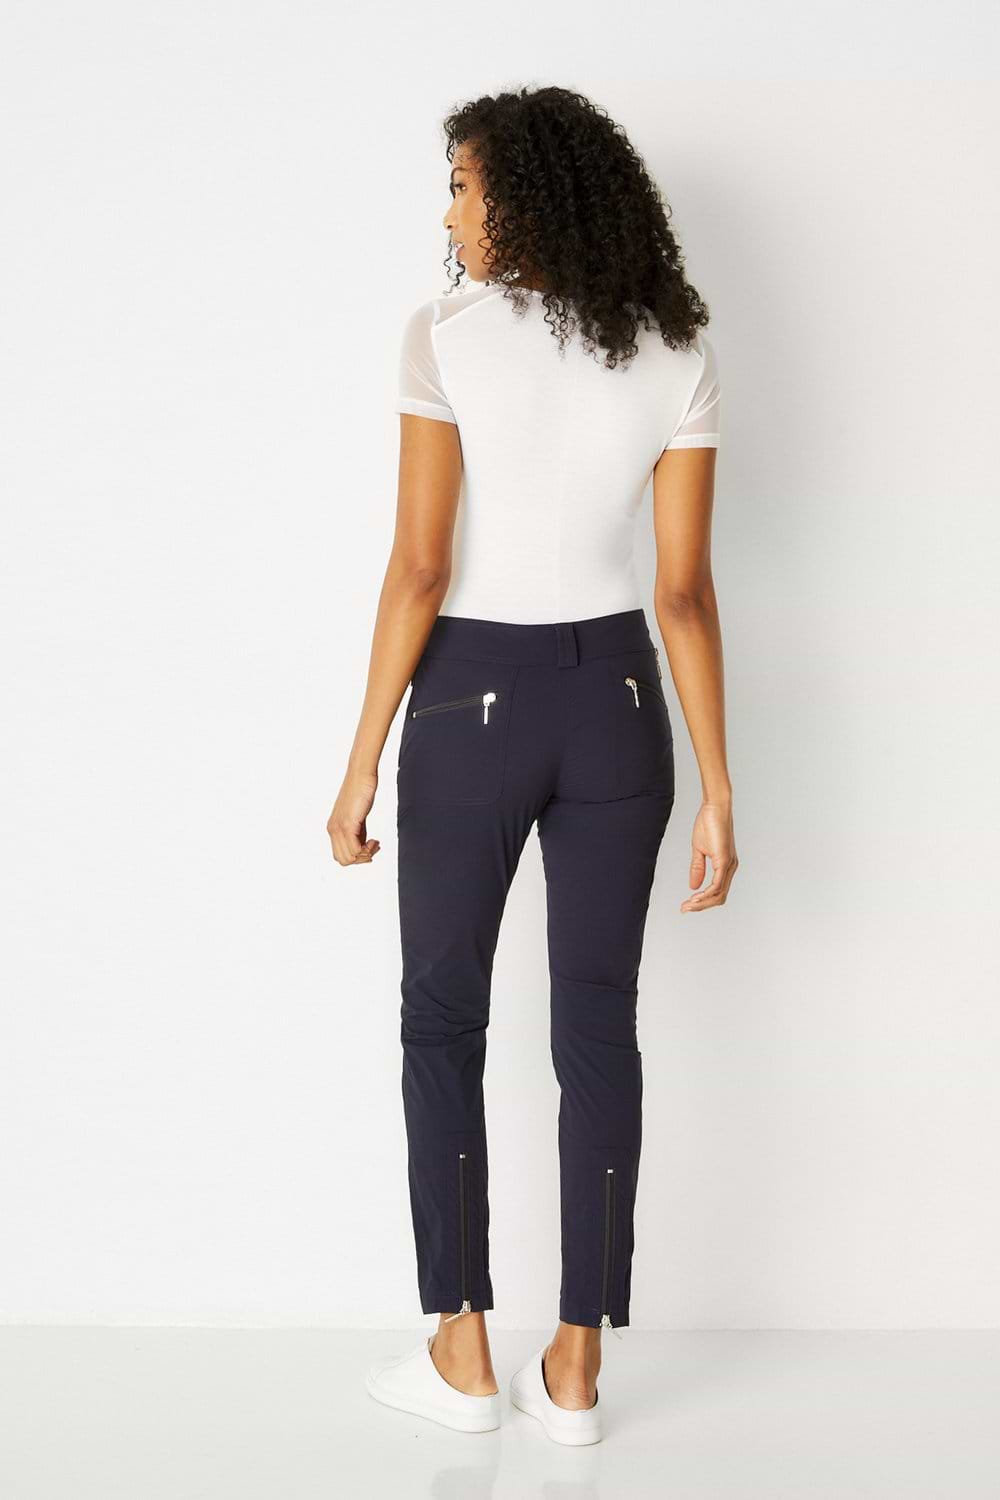 Anatomie Anatomie Susan Ankle Pants with Zip Detail